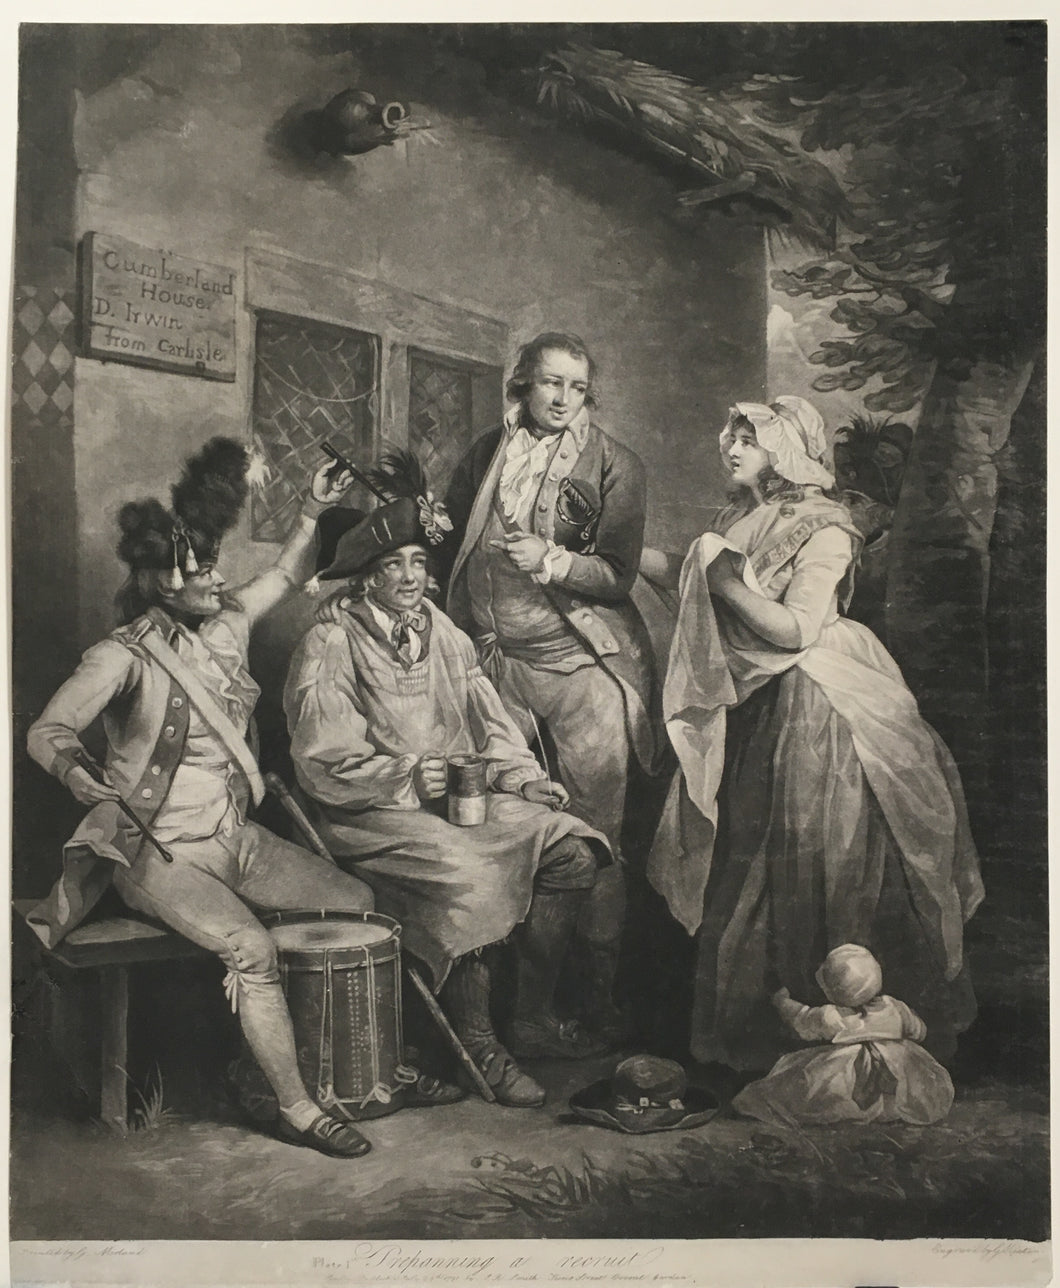 Morland, George [Set of four mezzotints telling the story of a military recruit]